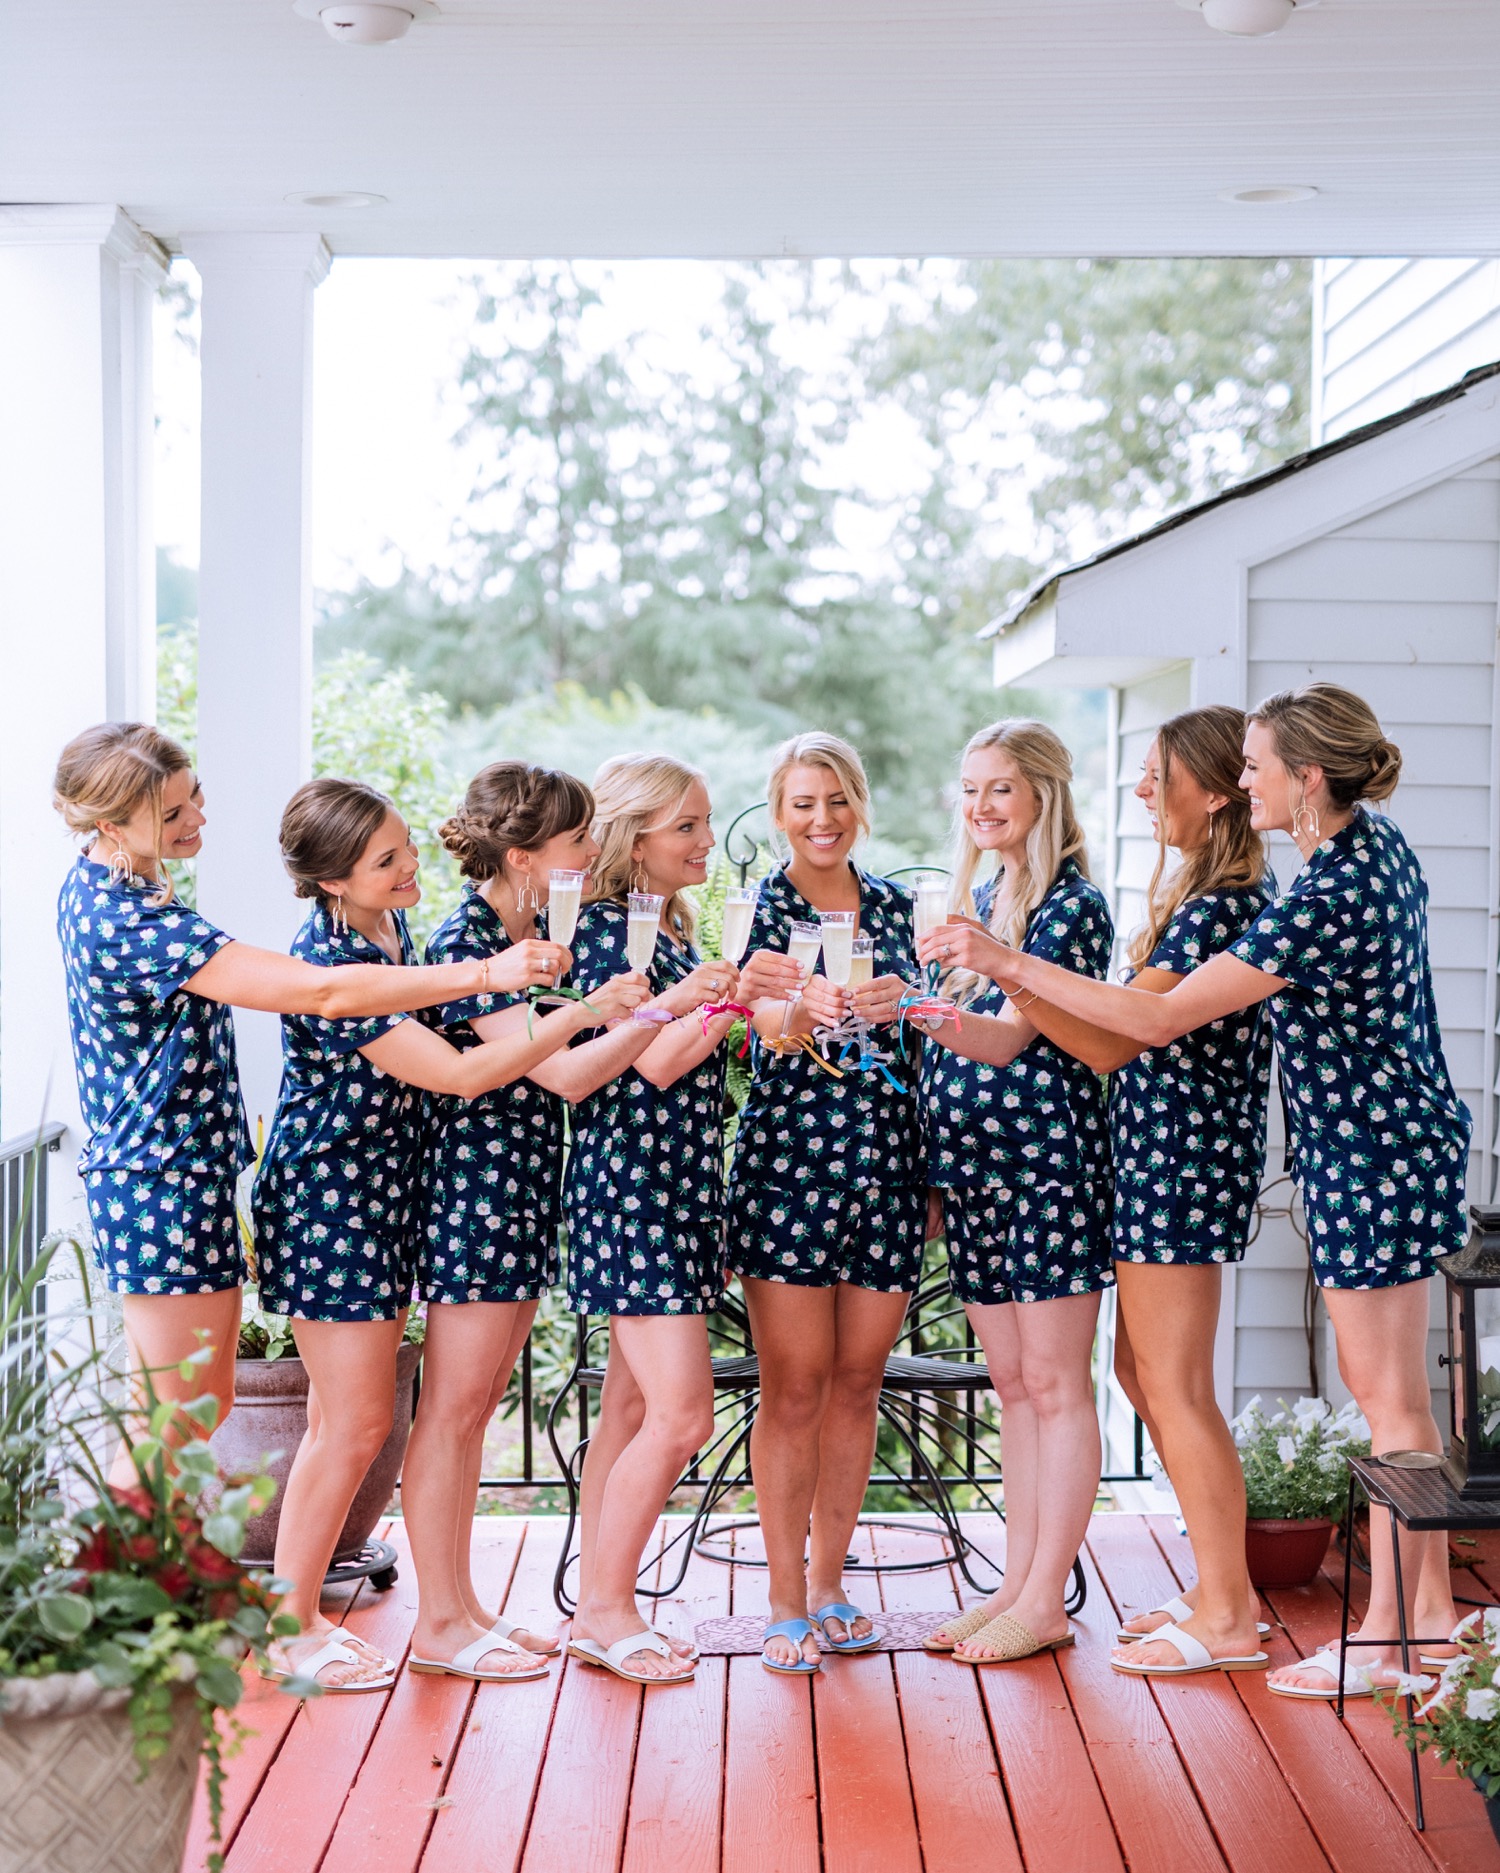 Bride and bridesmaids in matching polka dot pajamas sharing a champagne toast before wedding ceremony in Richmond, Virginia